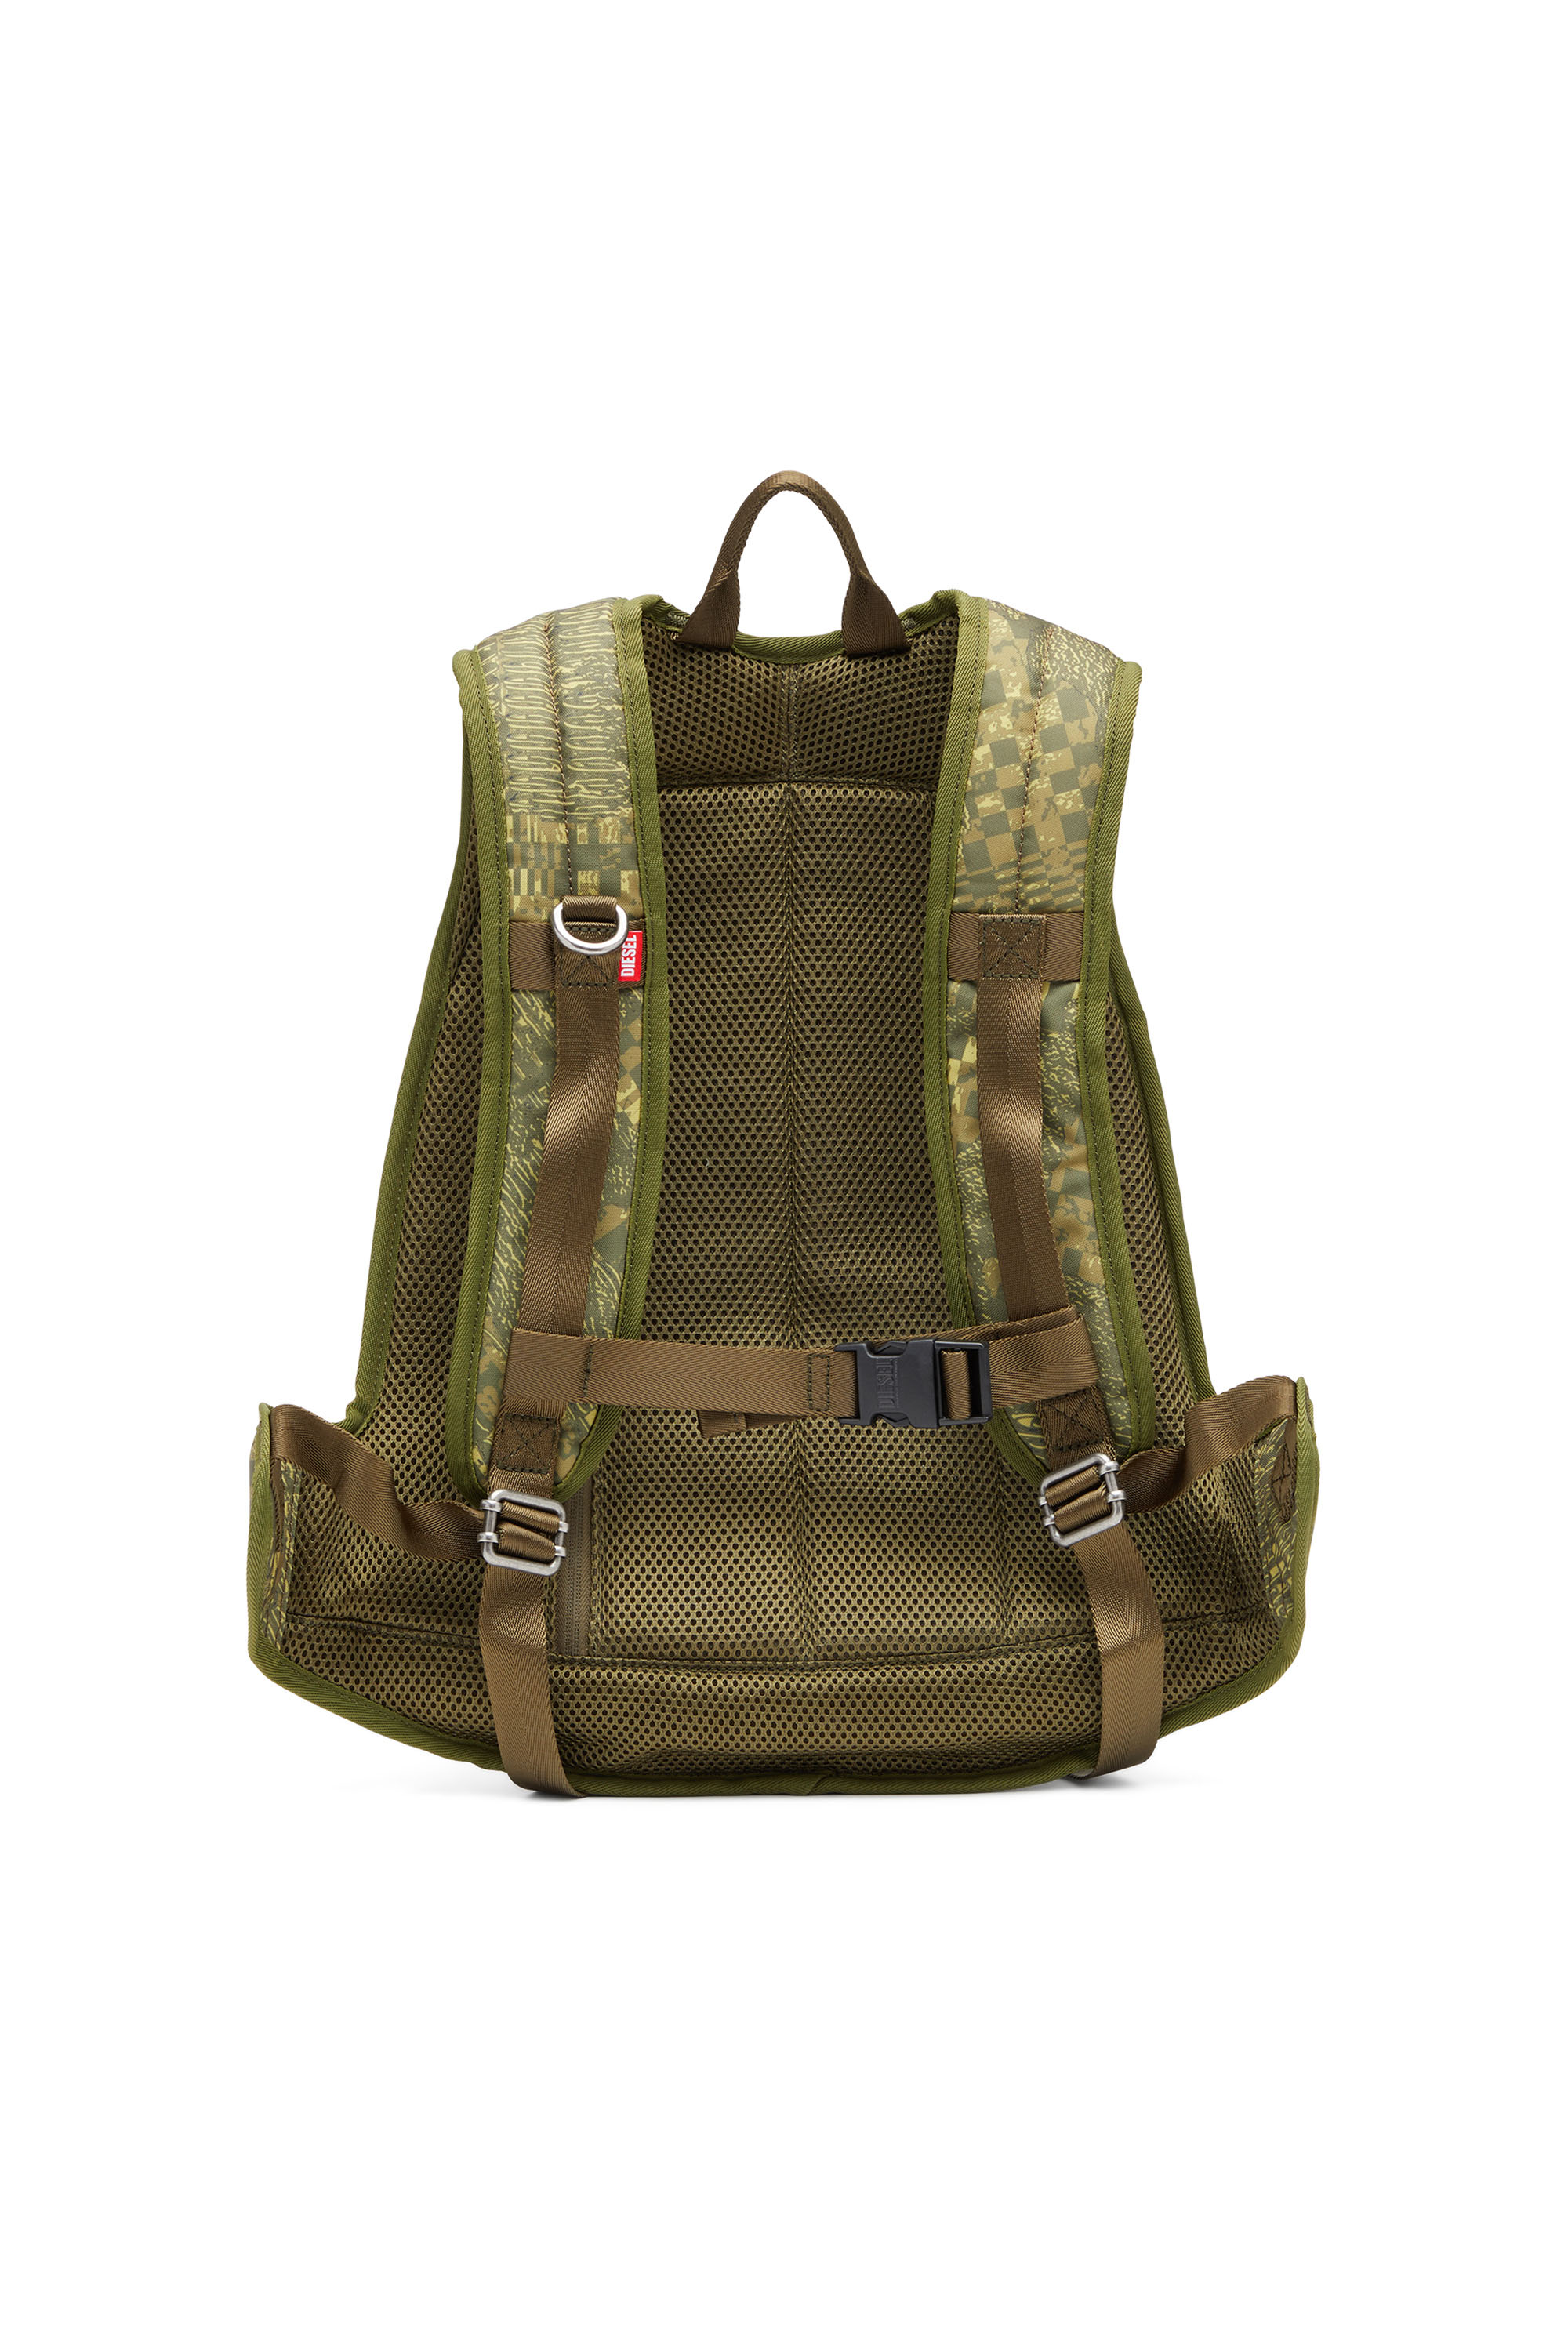 Diesel - 1DR-POD BACKPACK, Man 1DR-Pod Backpack - Hard shell backpack with camo print in Green - Image 2